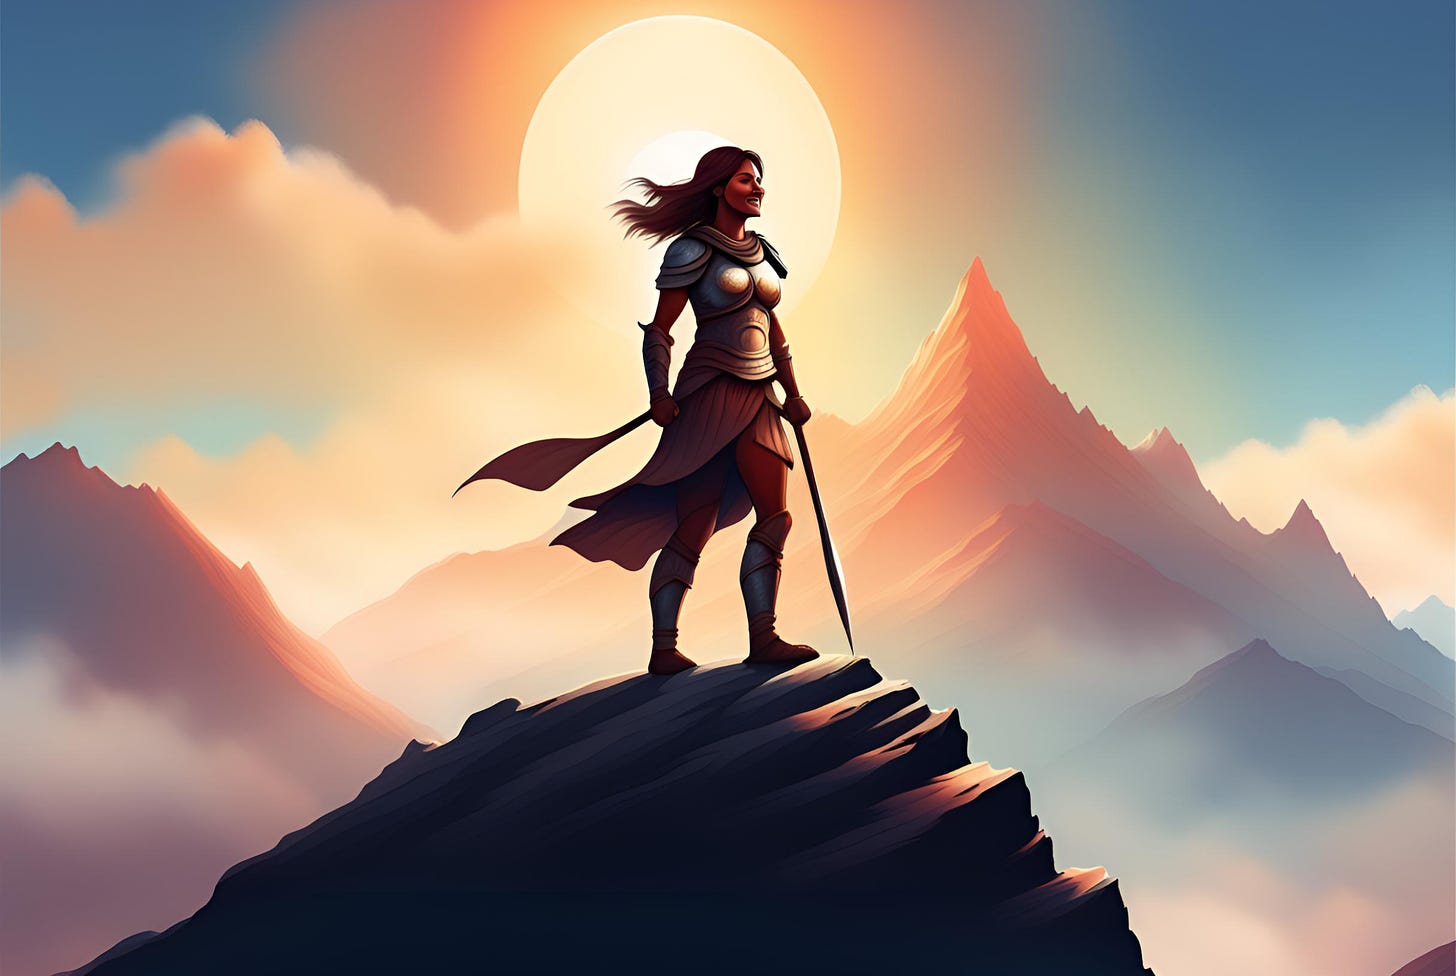 Illustration of a smiling woman warrior standing on the top of a mountain on a sunny day